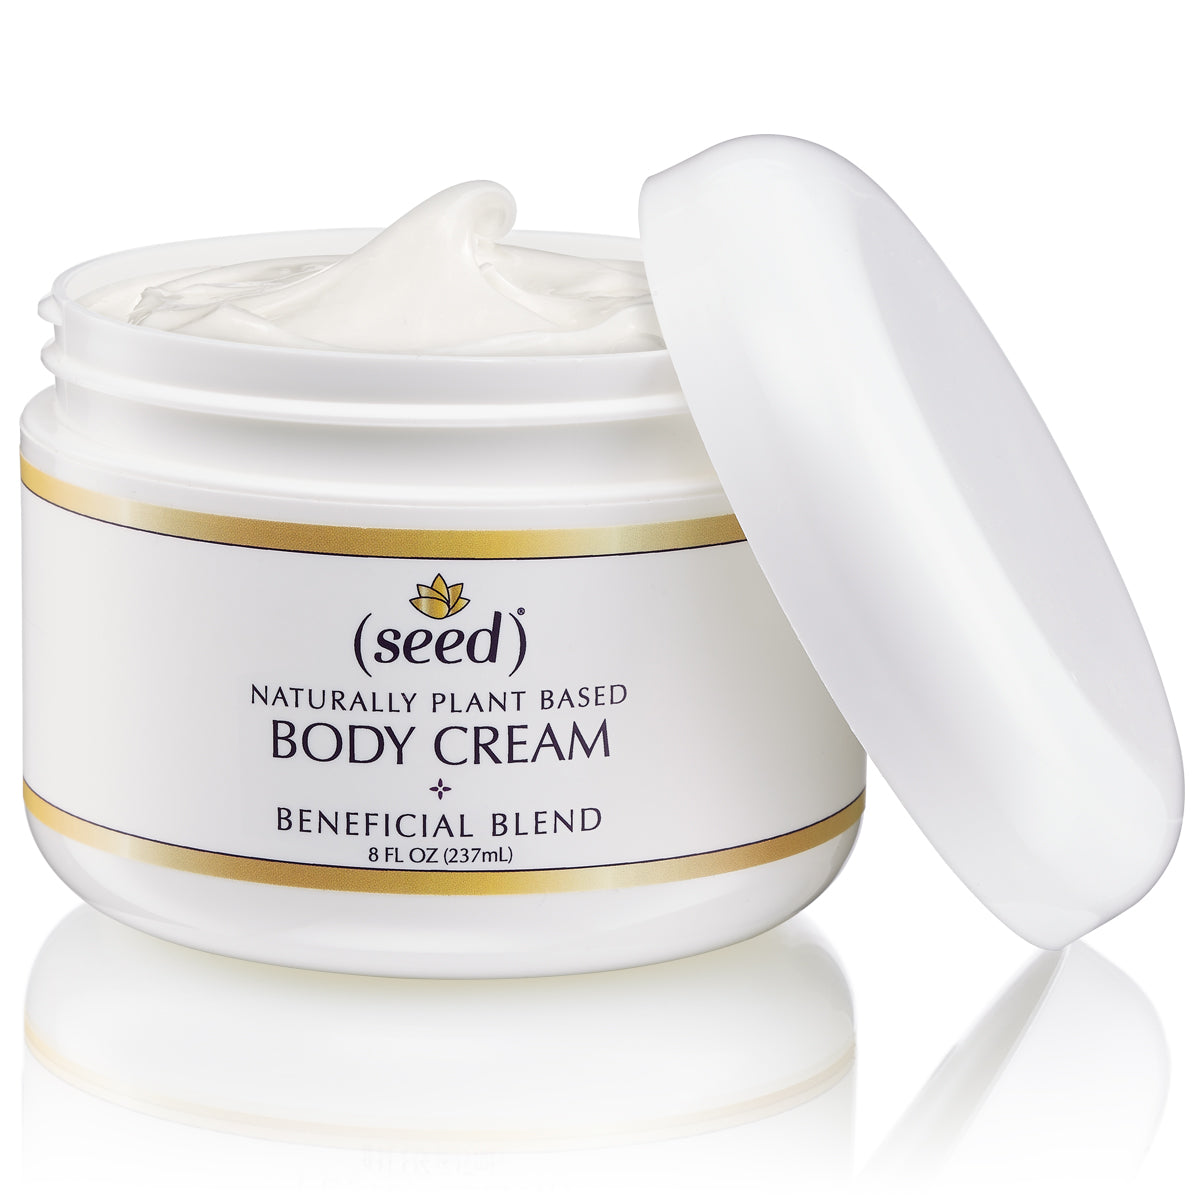 Seed Seeduction Blend Body Cream with essential oils of ylang ylang, patchouli, and ginger